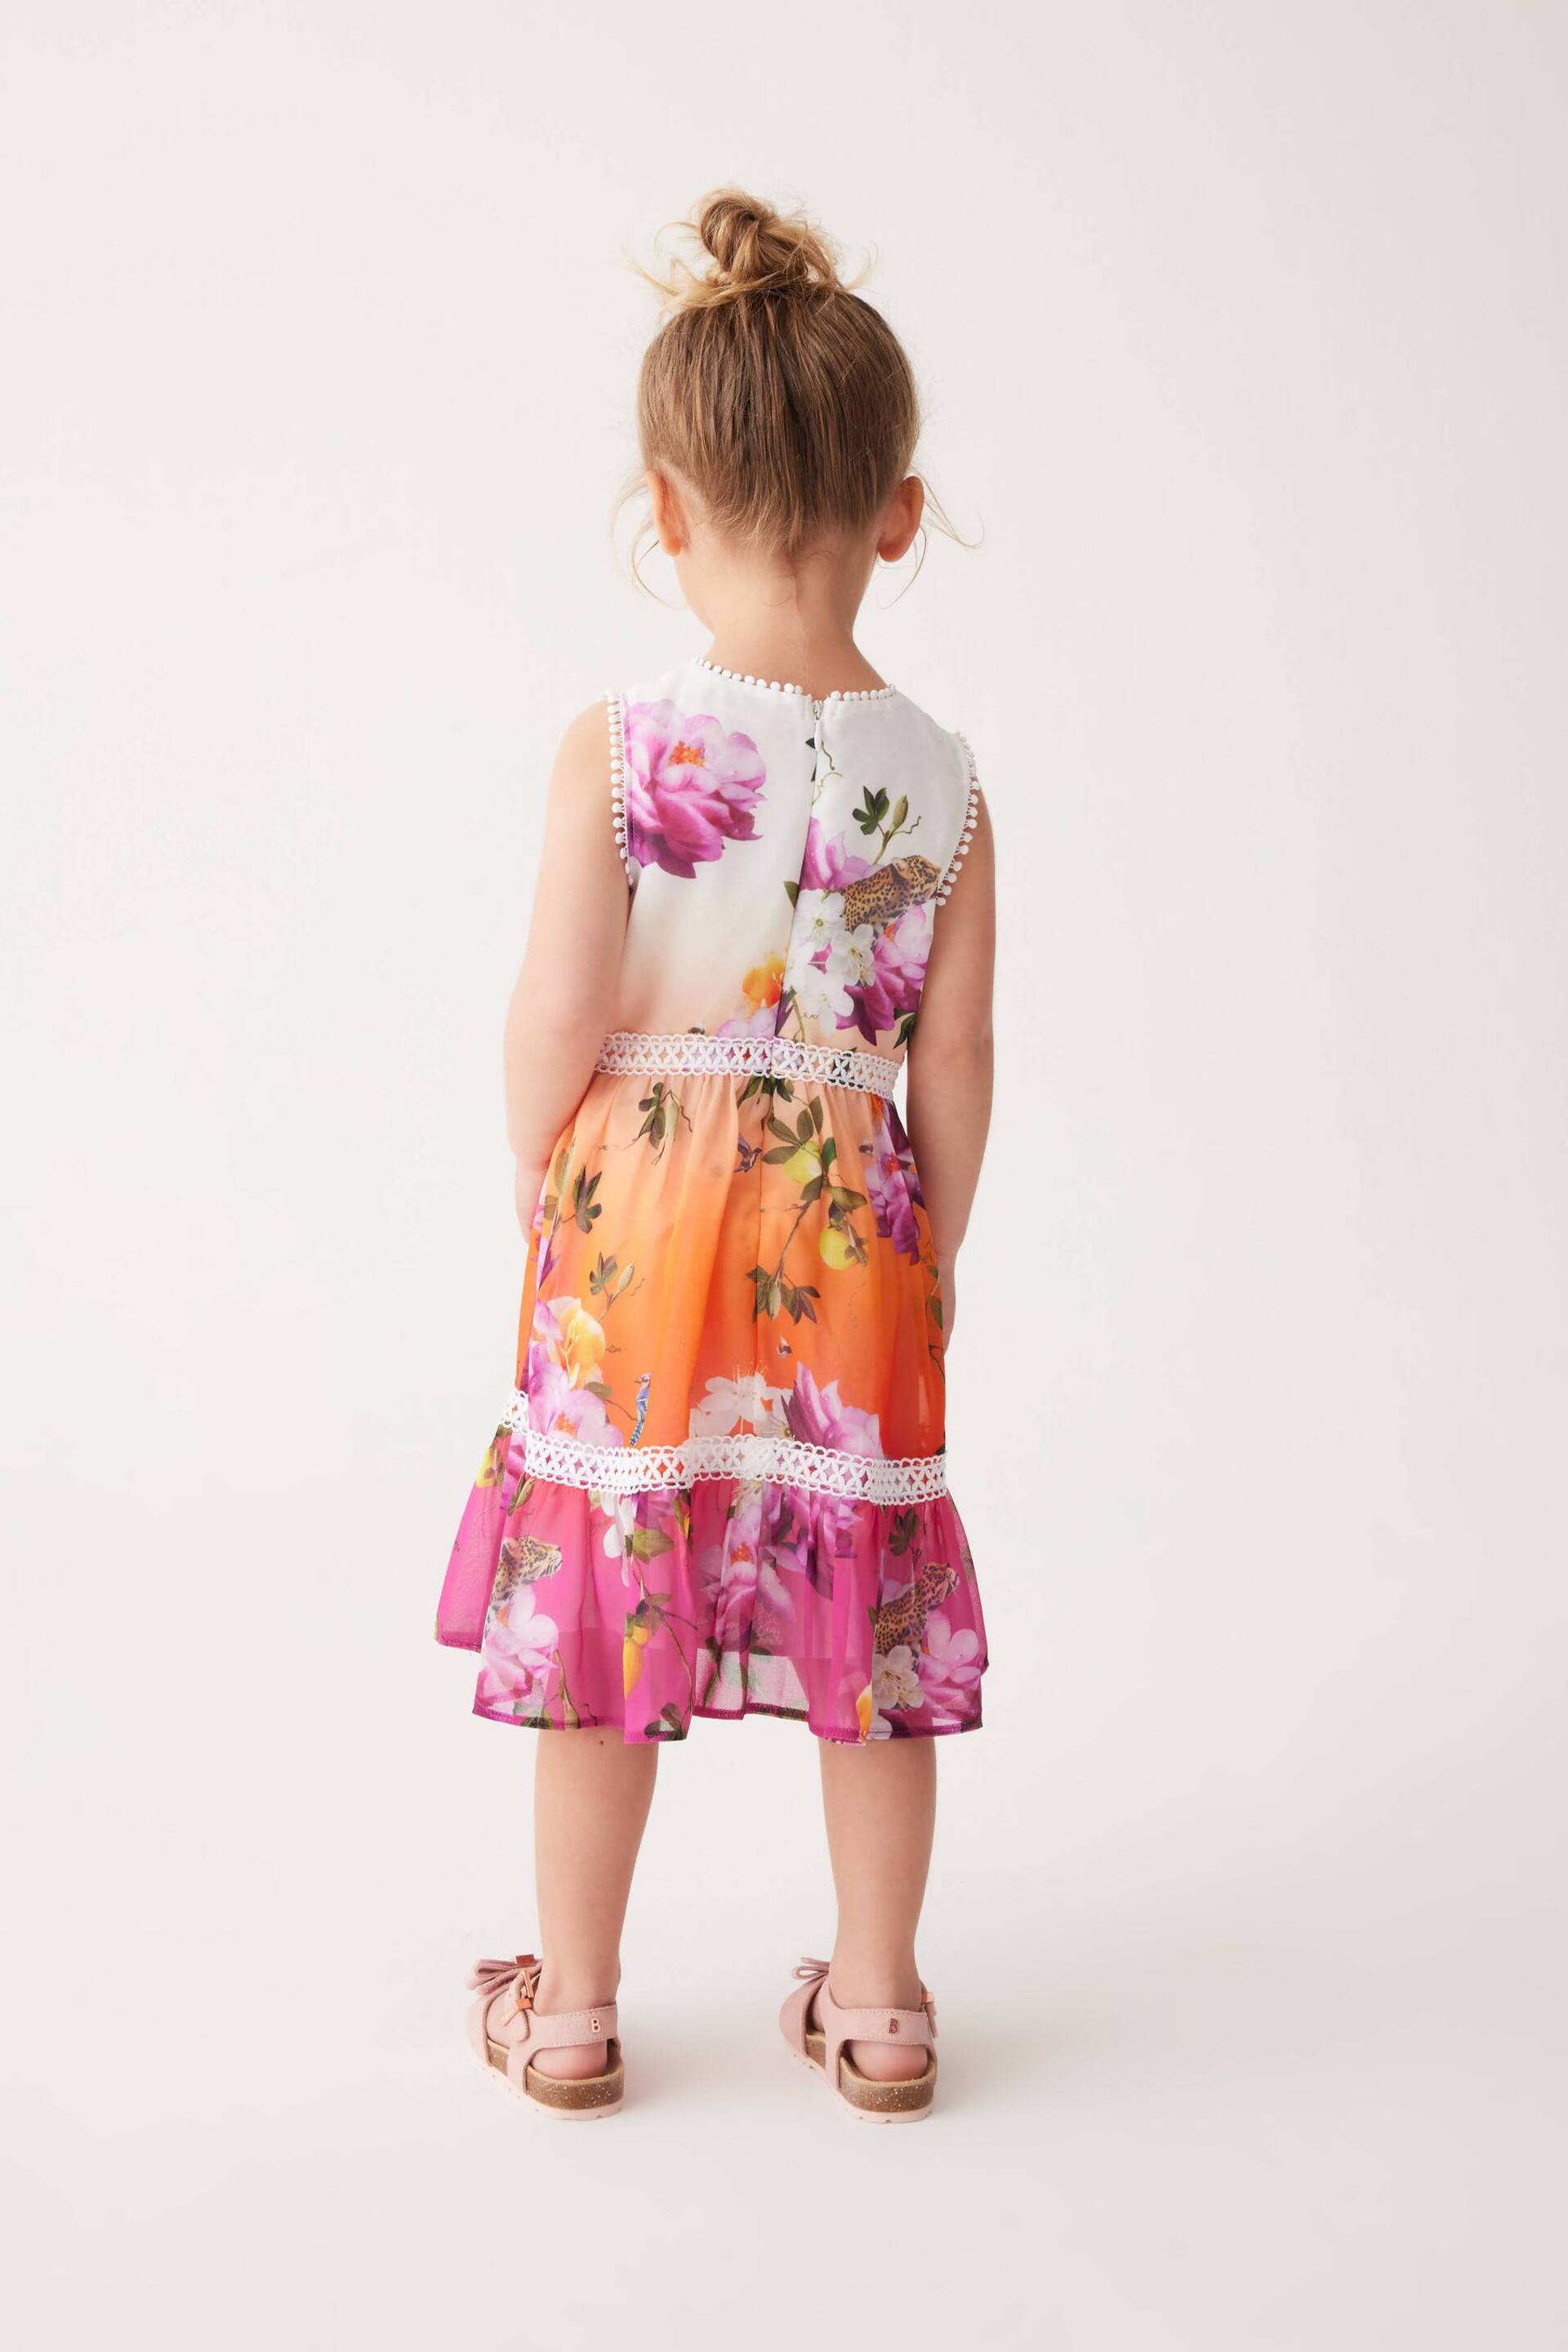 Baker by Ted Baker Multi Ombre Chiffon Dress - Image 2 of 9